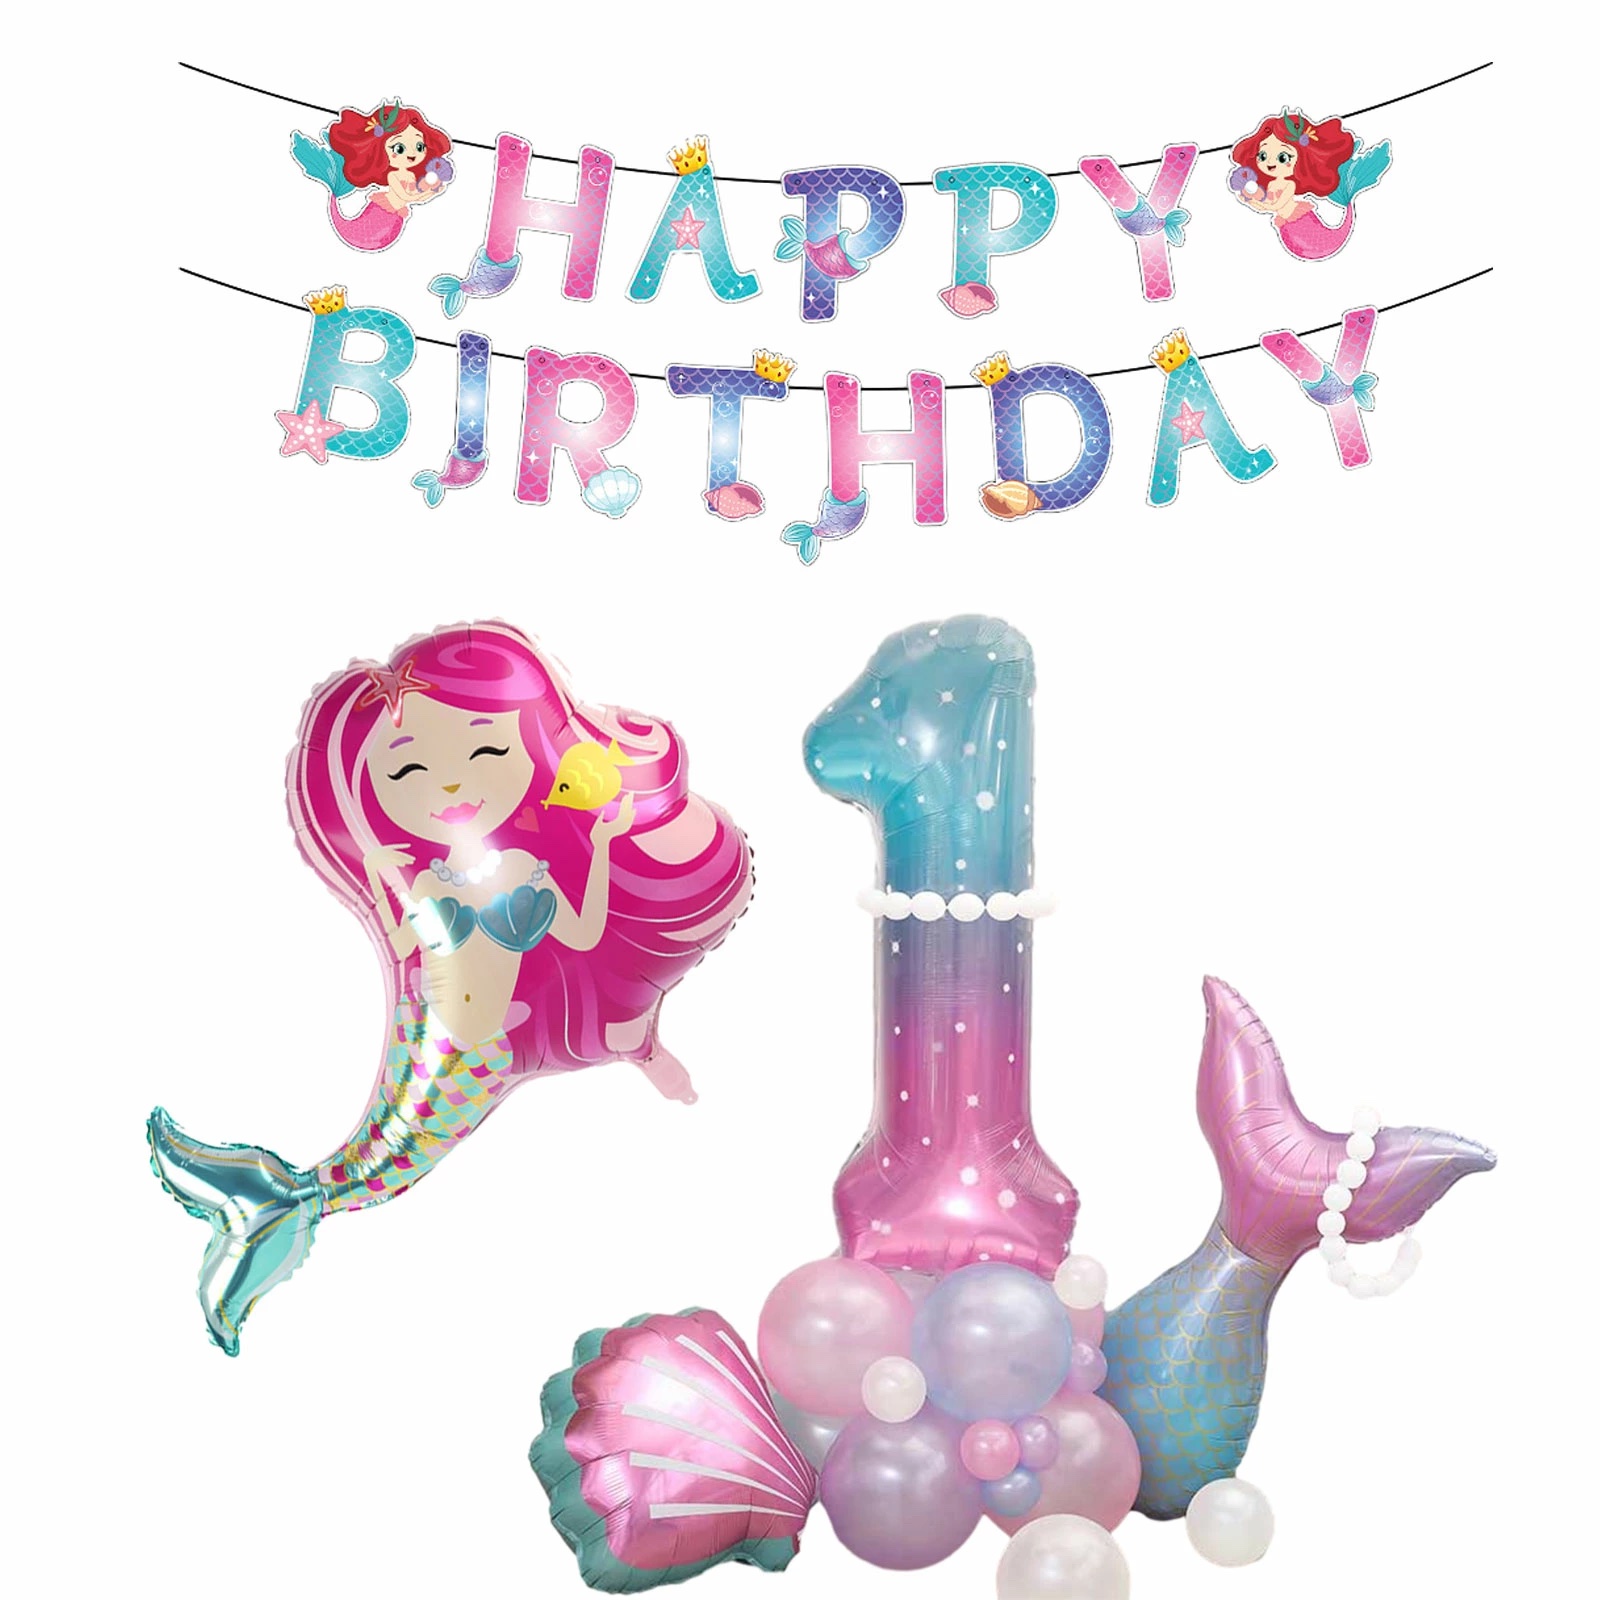  birthday decoration person fish .ba Rune set? mermaid Princess girl 1 -years old 2 -years old 3 -years old 4 -years old manner boat sea birthday party mermaid tail shell sea person fish equipment ornament 